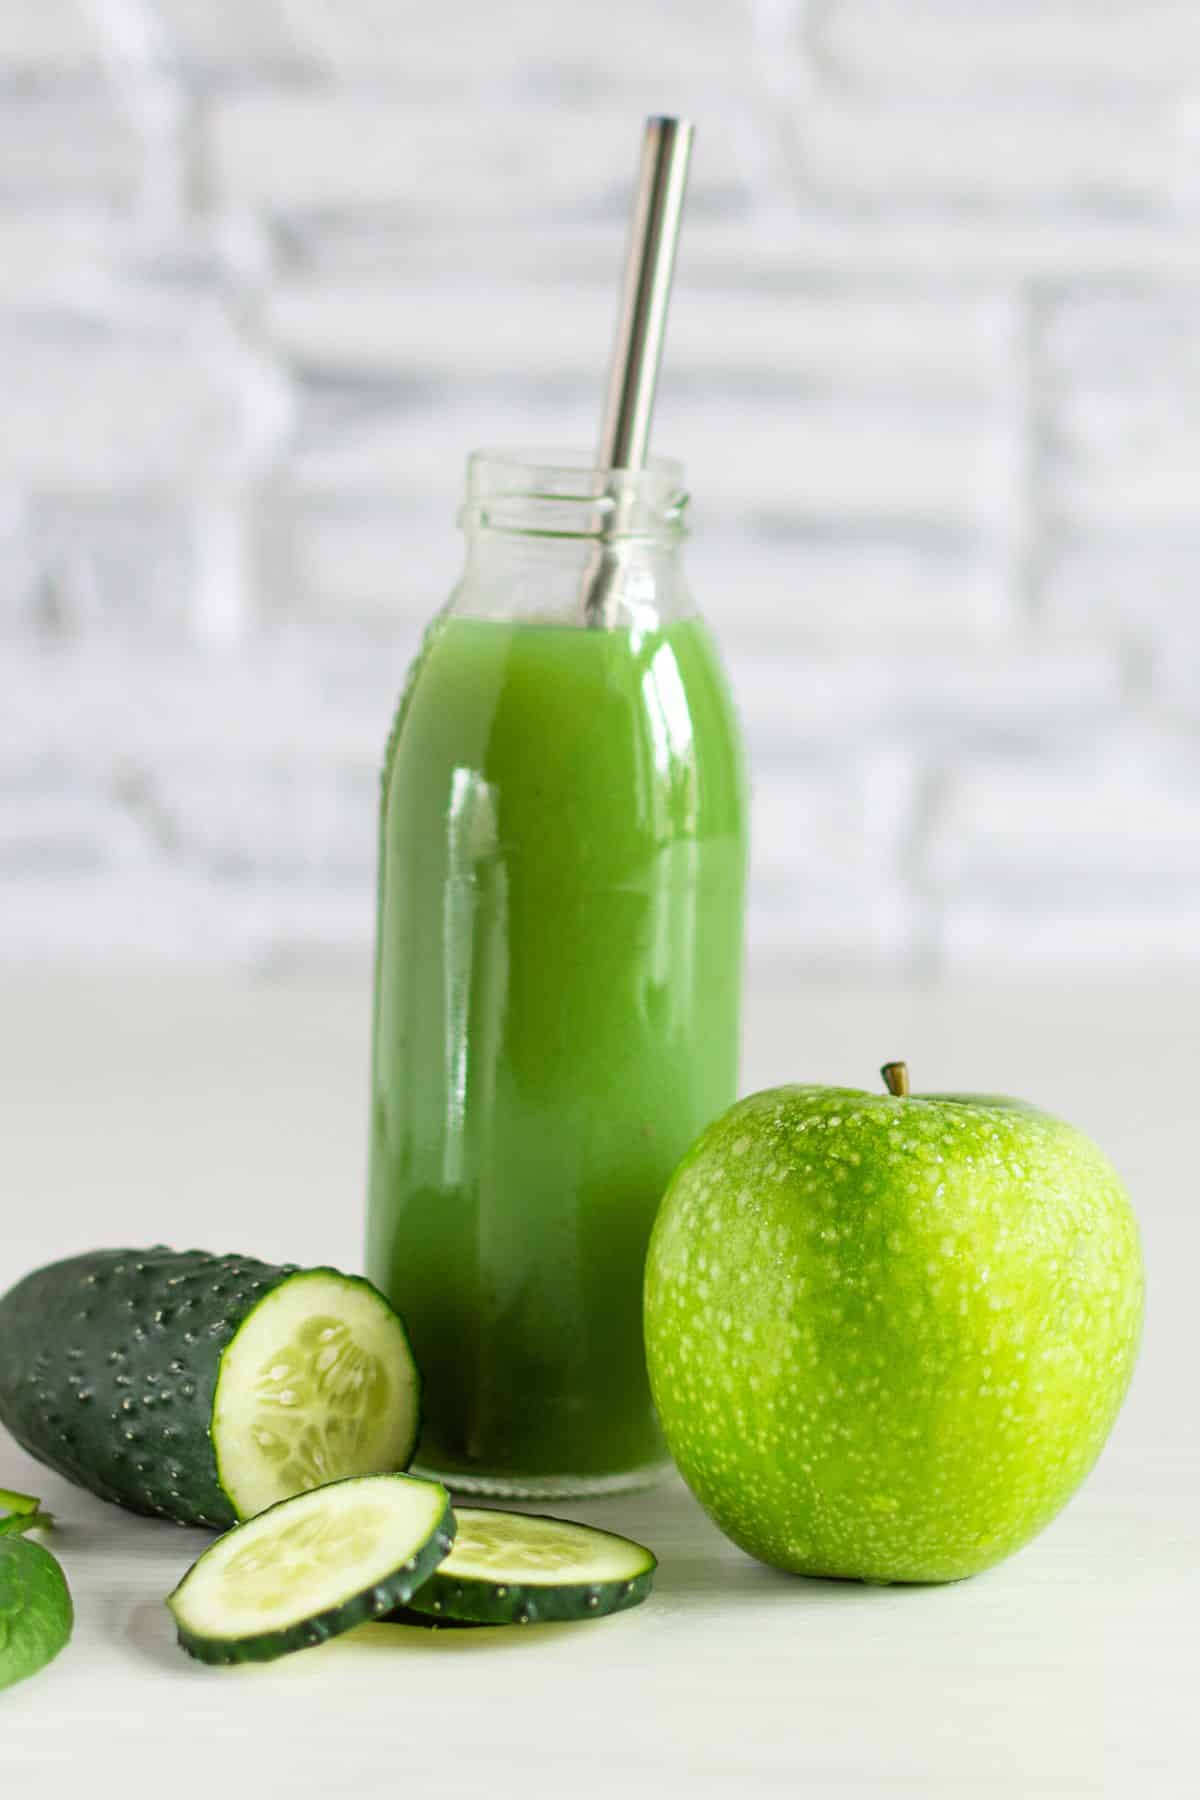 A tall thin milk bottle of green juice next to an apple and cucumber.